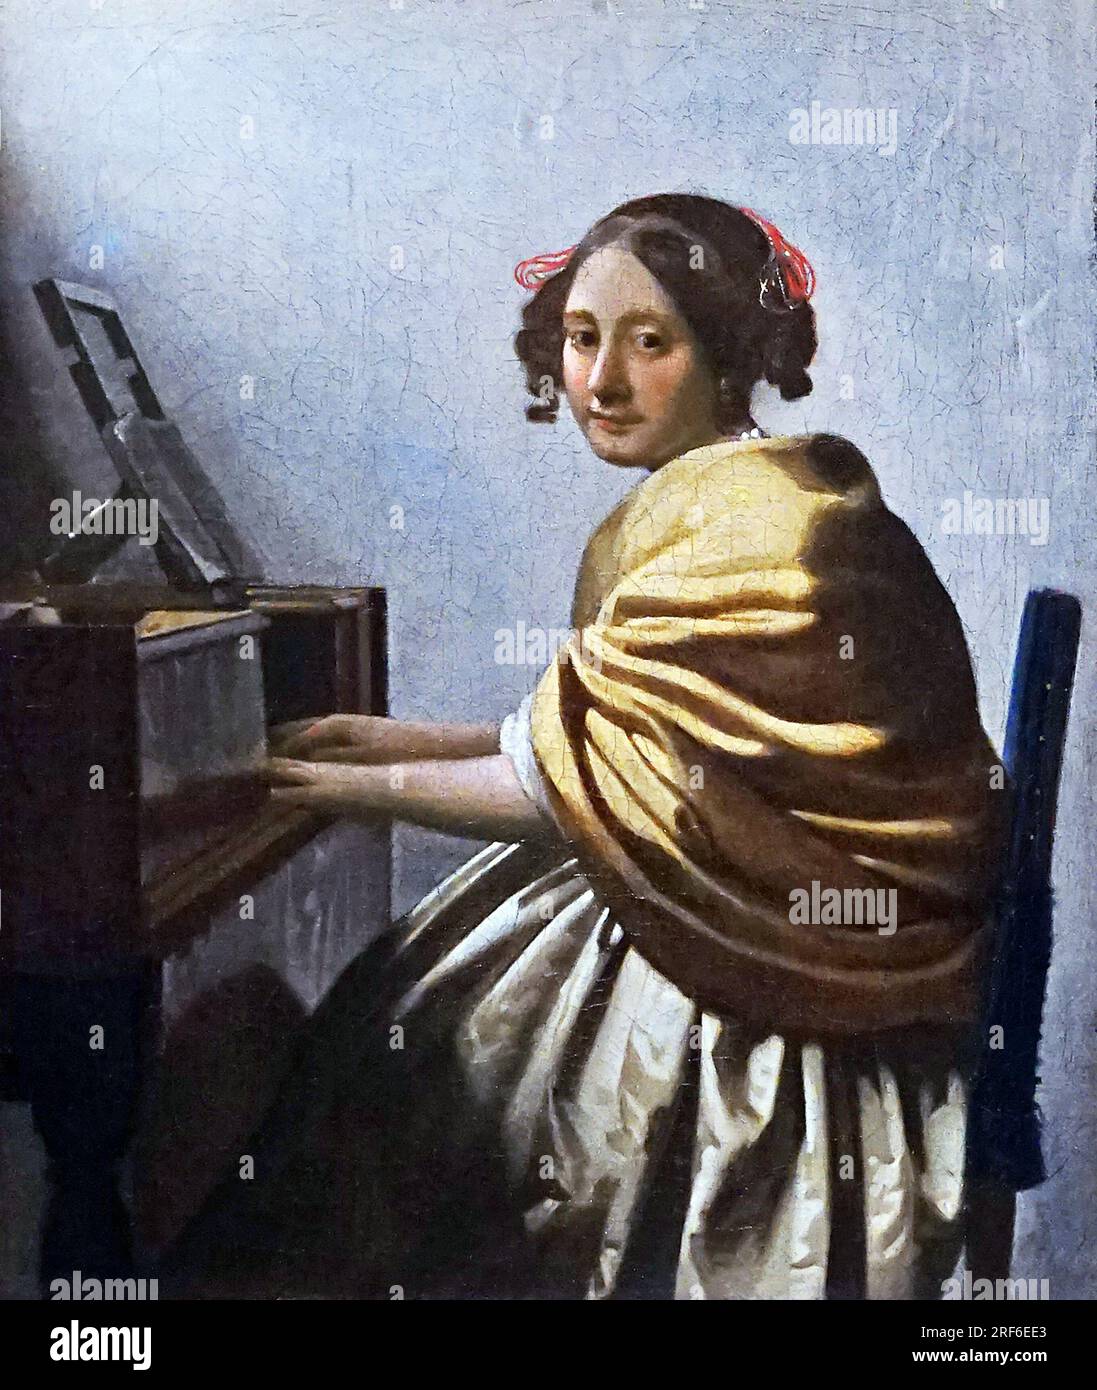 Young Woman Seated at a Virginal by Johannes Vermeer Jan Vermeer 1632 - 1675.Dutch Baroque Period painter. Stock Photo